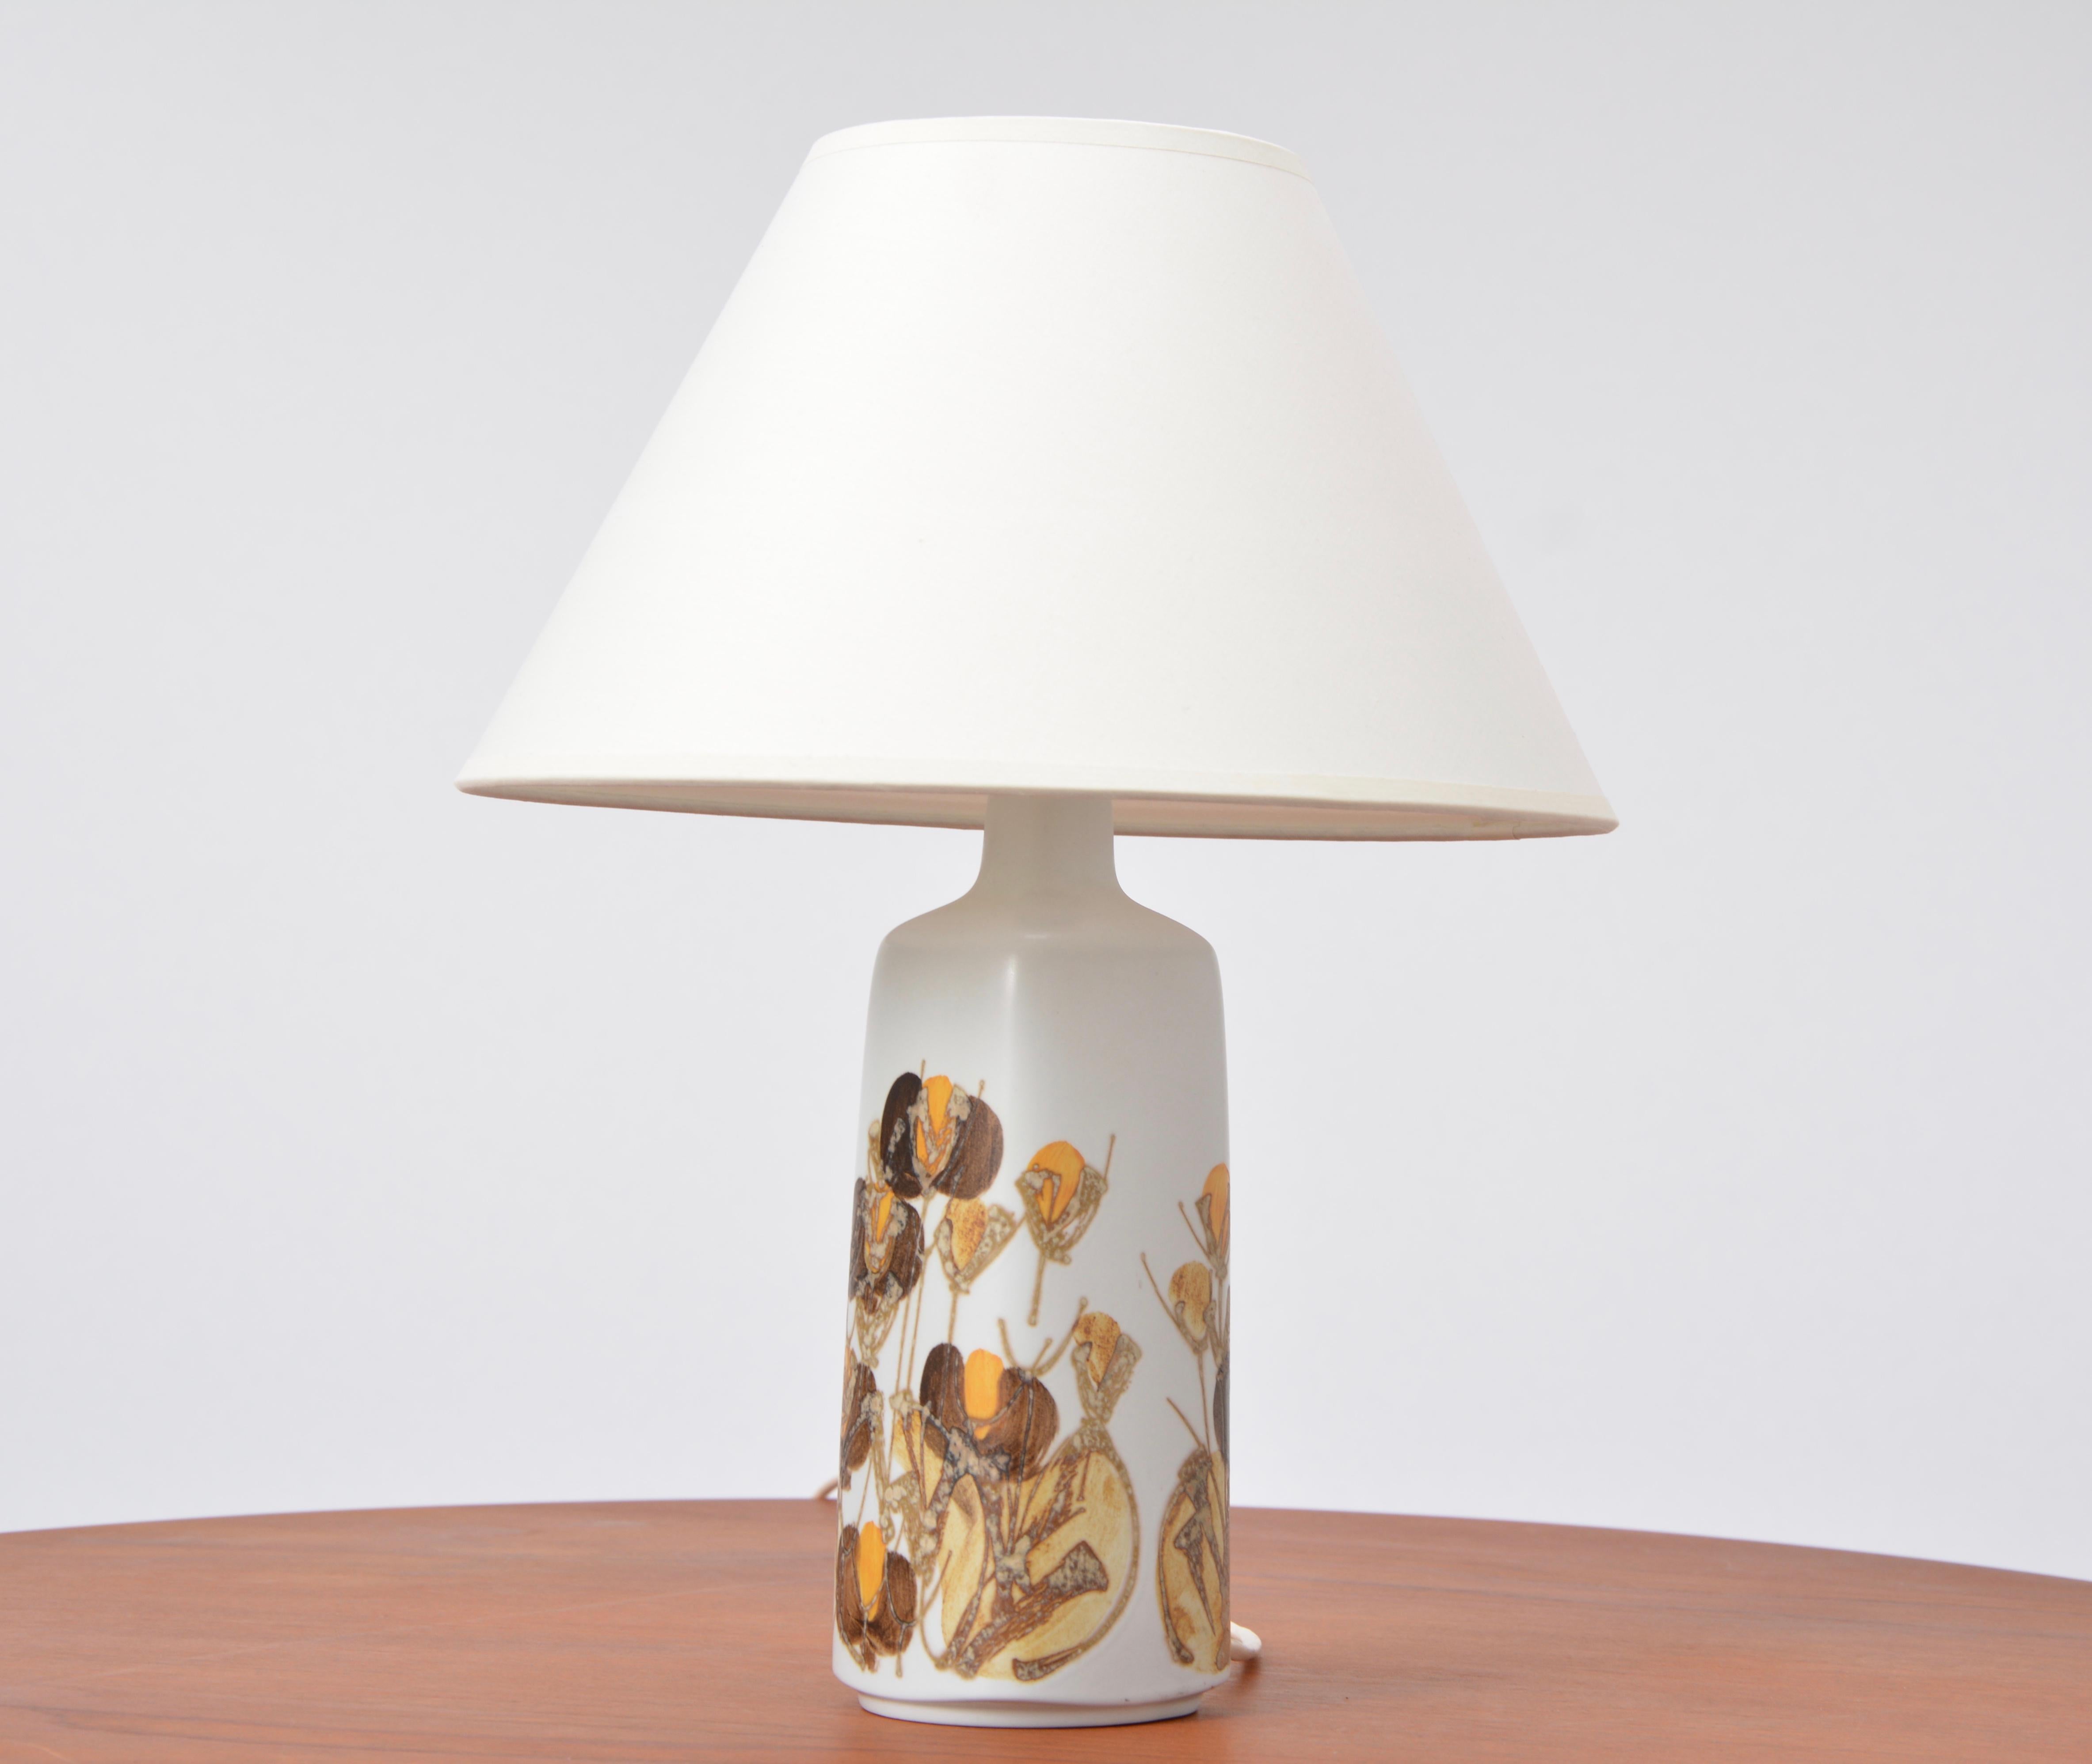 This table lamp was designed by Ellen Malmer and produced by Royal Copenhagen in the 1960s. The lamp is sold without the shade. The lamp is in excellent vintage condition.